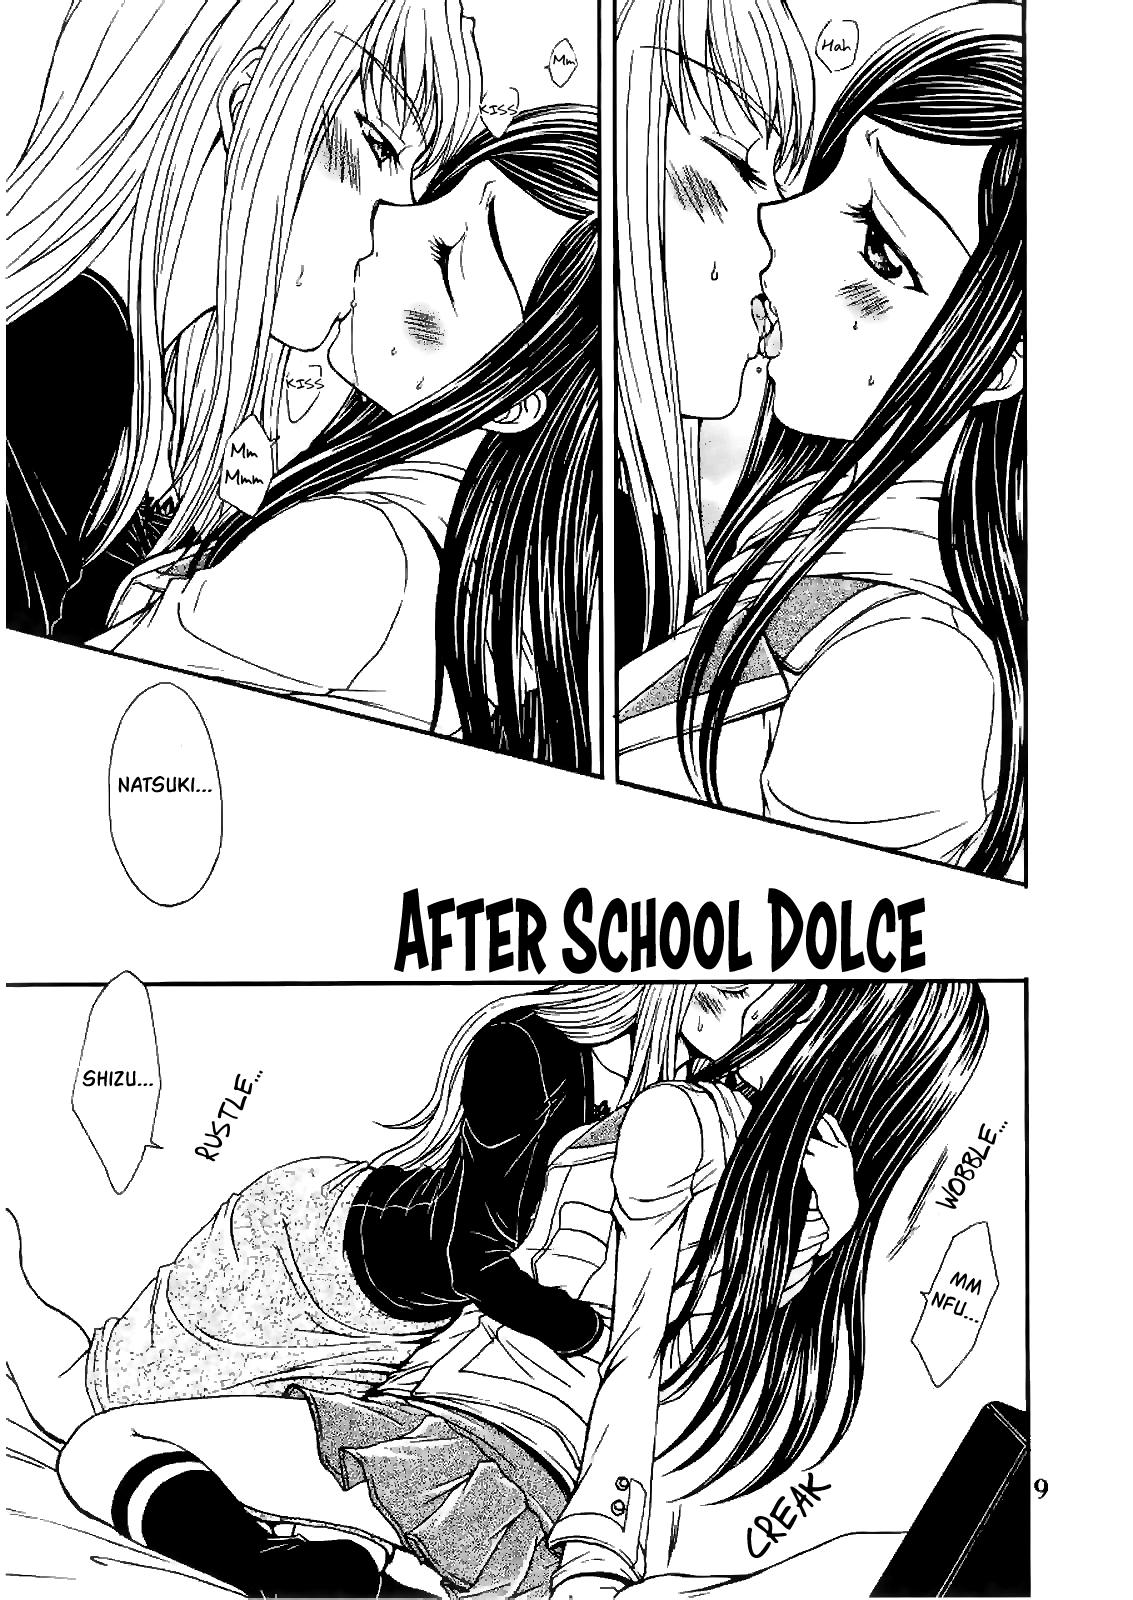 After School Dolce 9